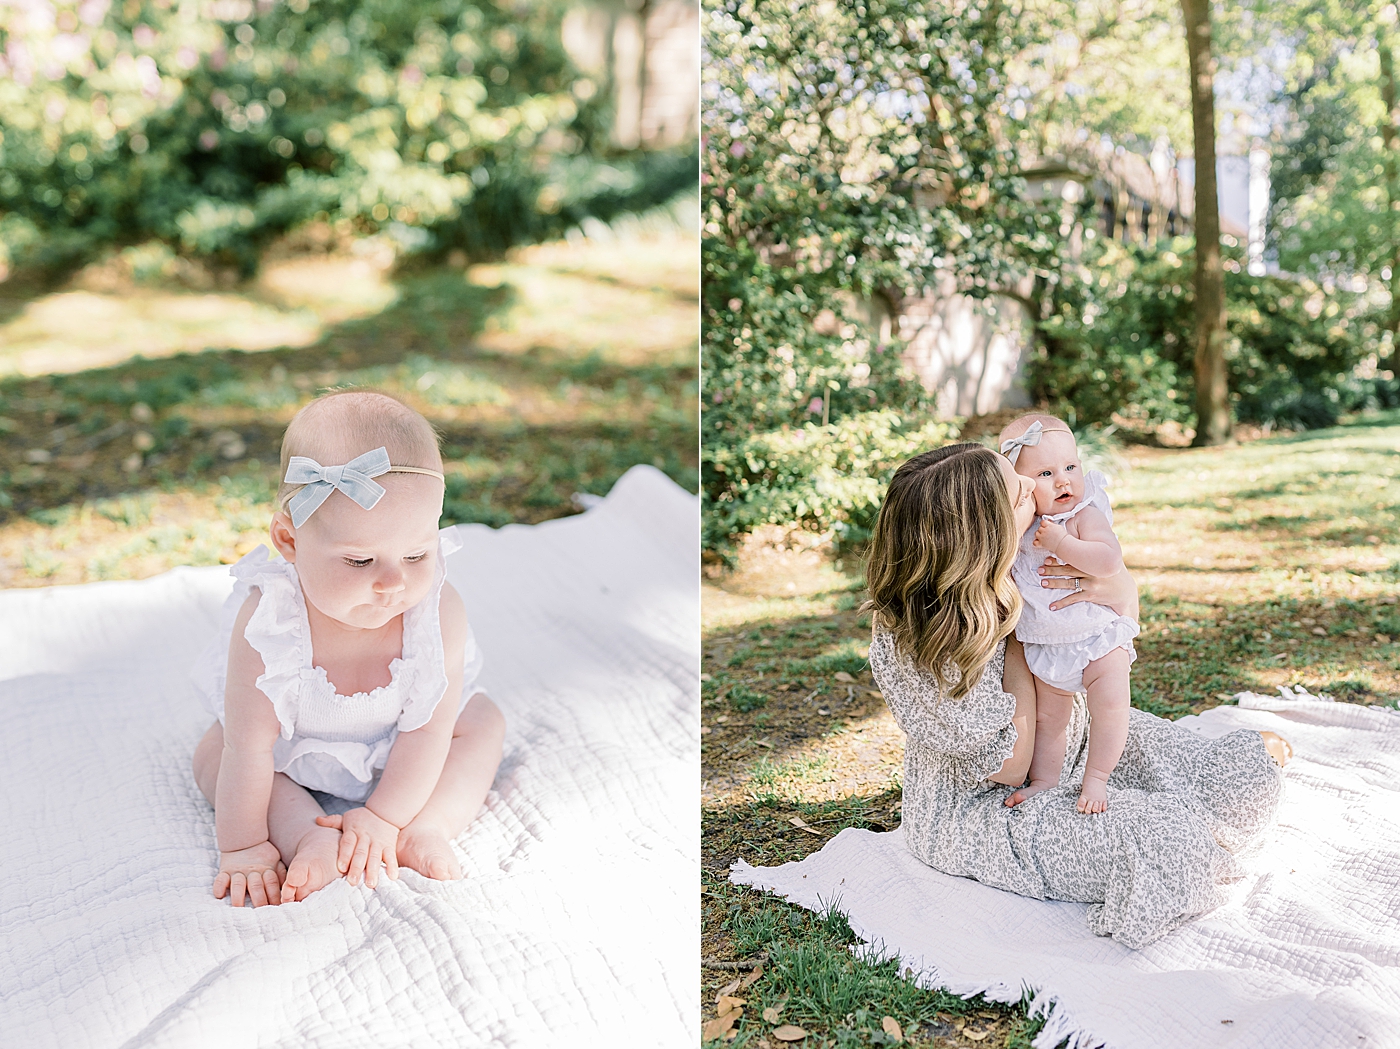 Side by side images of a baby on a blanket and of a mother in a spring dress holding her baby | Image by Caitlyn Motycka